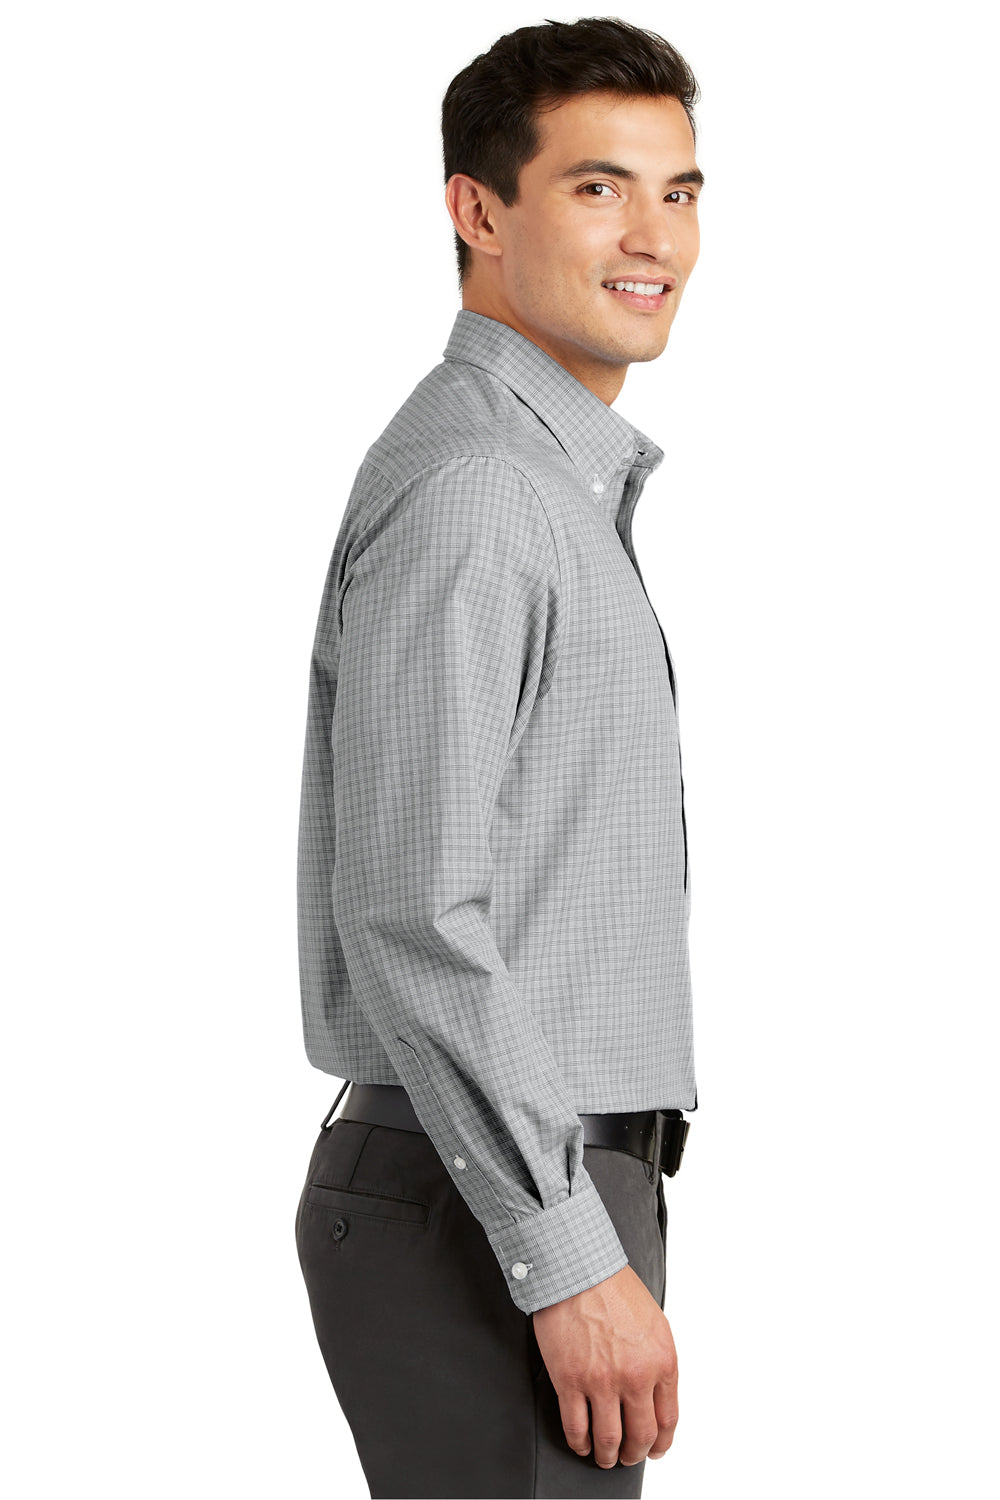 Port Authority S639 Mens Easy Care Wrinkle Resistant Long Sleeve Button Down Shirt w/ Pocket Charcoal Grey Side